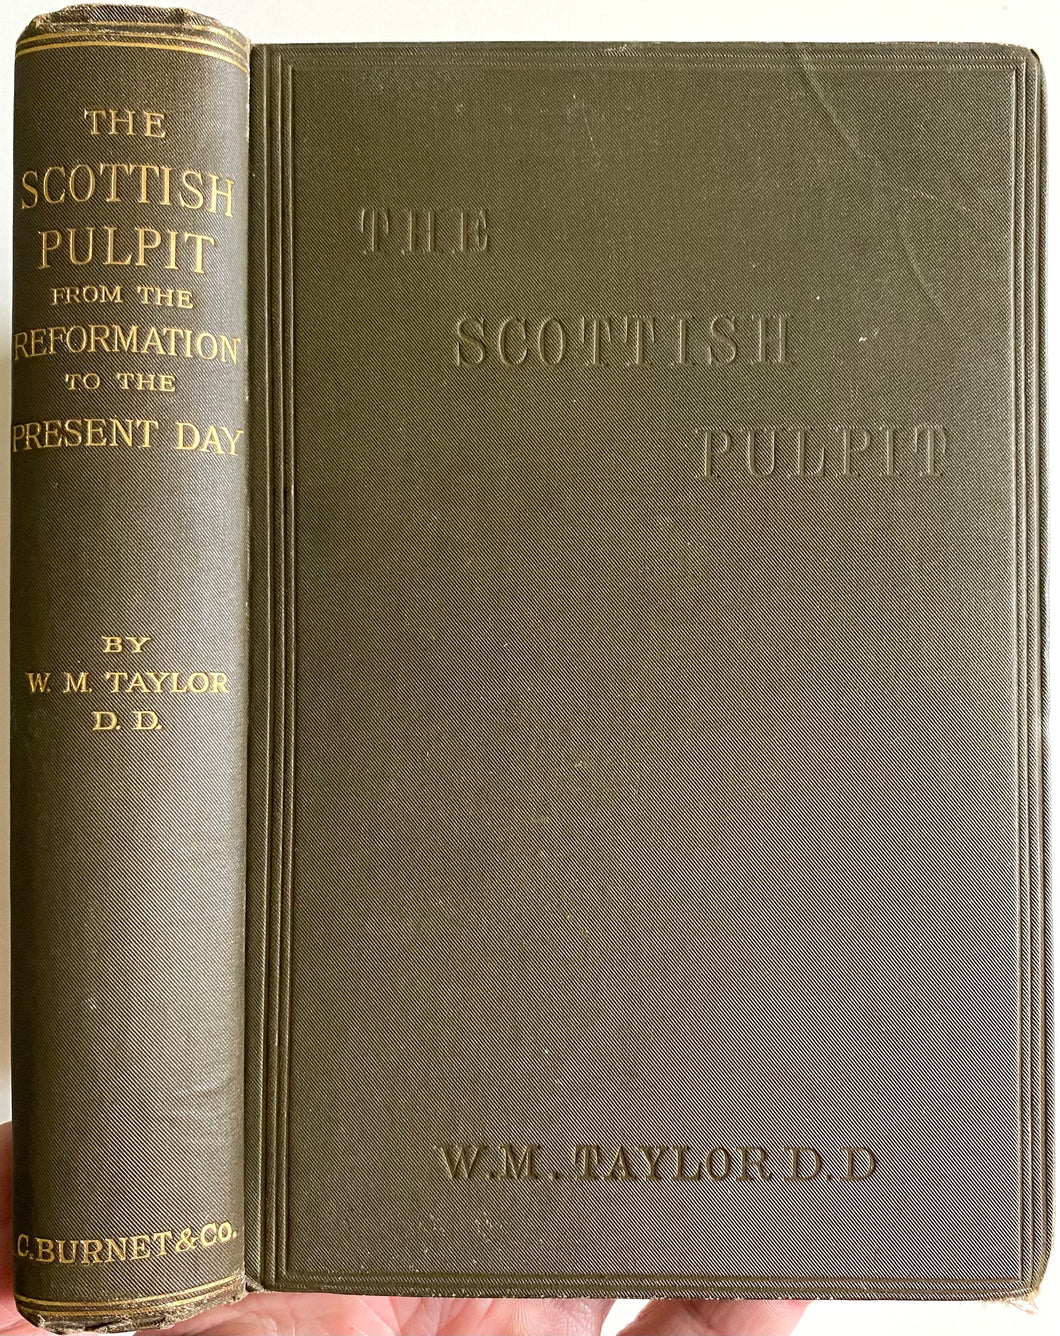 1887 W. M. TAYLOR. History of Scottish Preaching from Reformation to the Present. Superb!